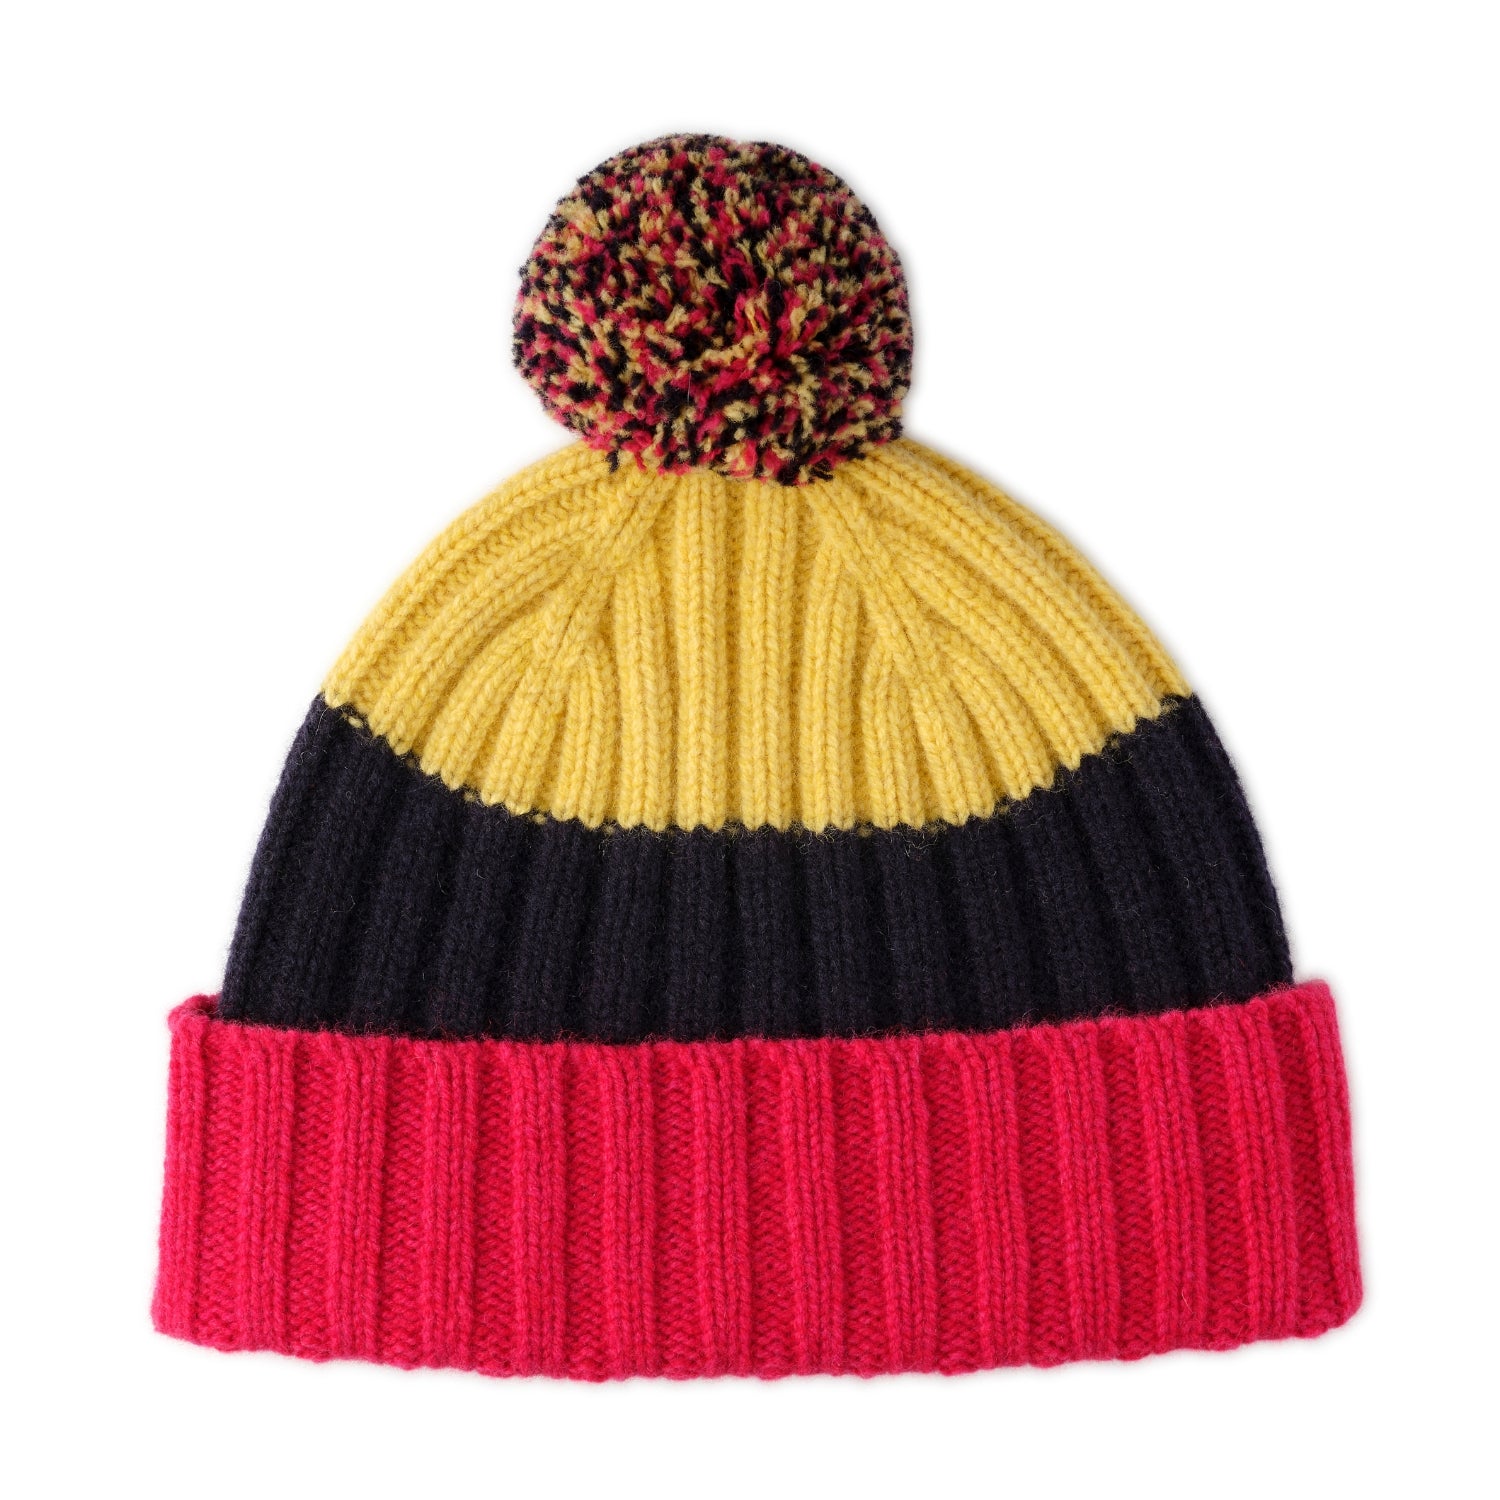 Chuncky lambswool beanie hat for ladies - red